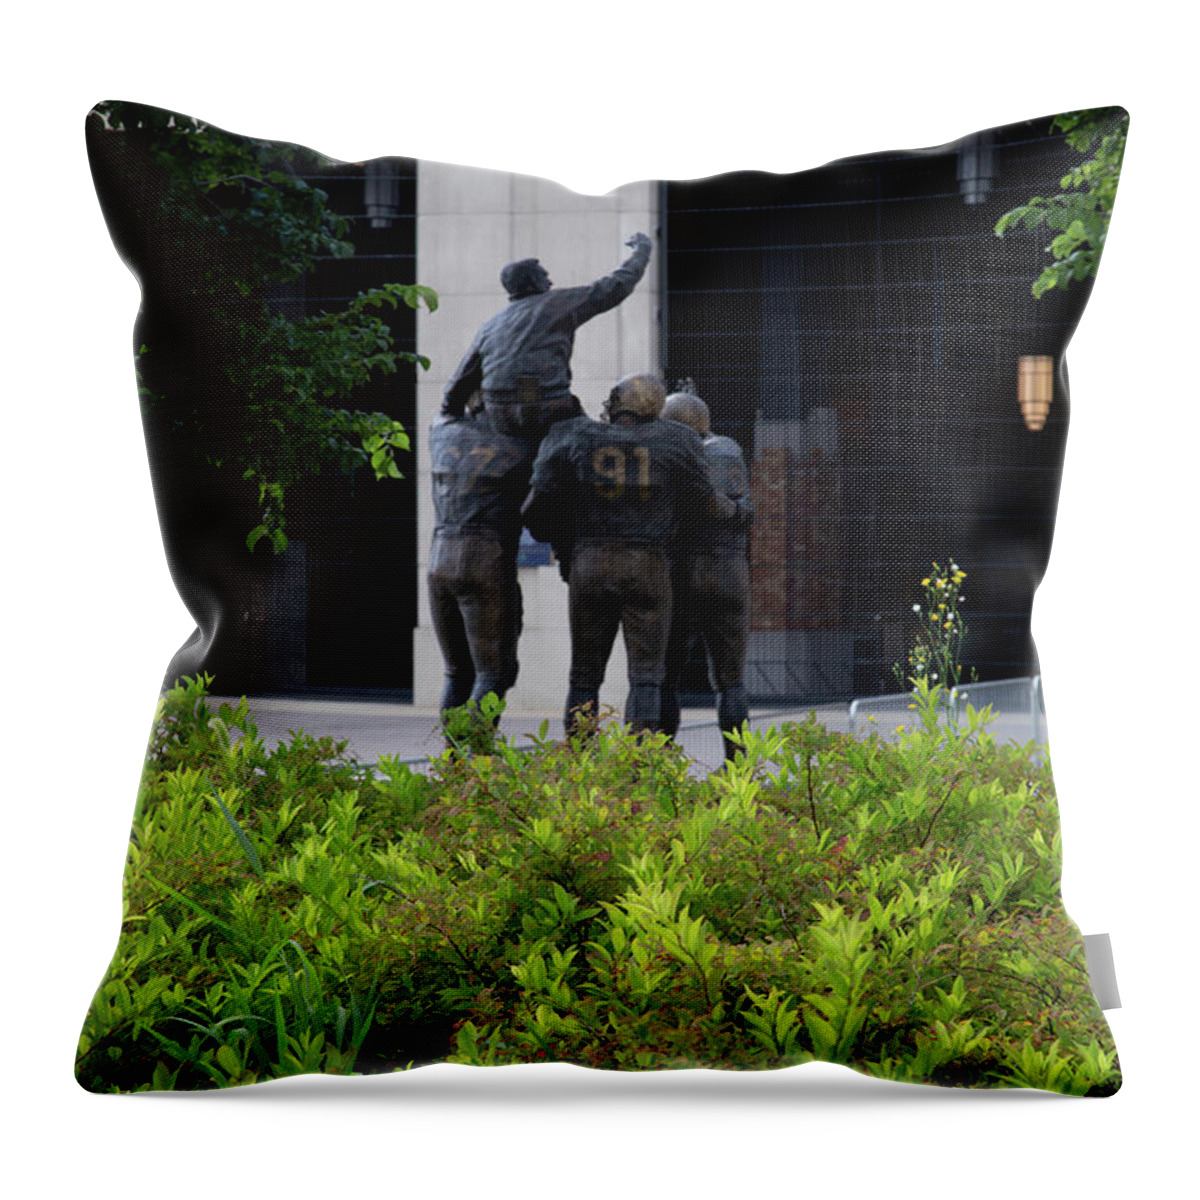 Notre Dame Fighting Irish Throw Pillow featuring the photograph Back view of Coach Ara Parseghian at University of Notre Dame by Eldon McGraw